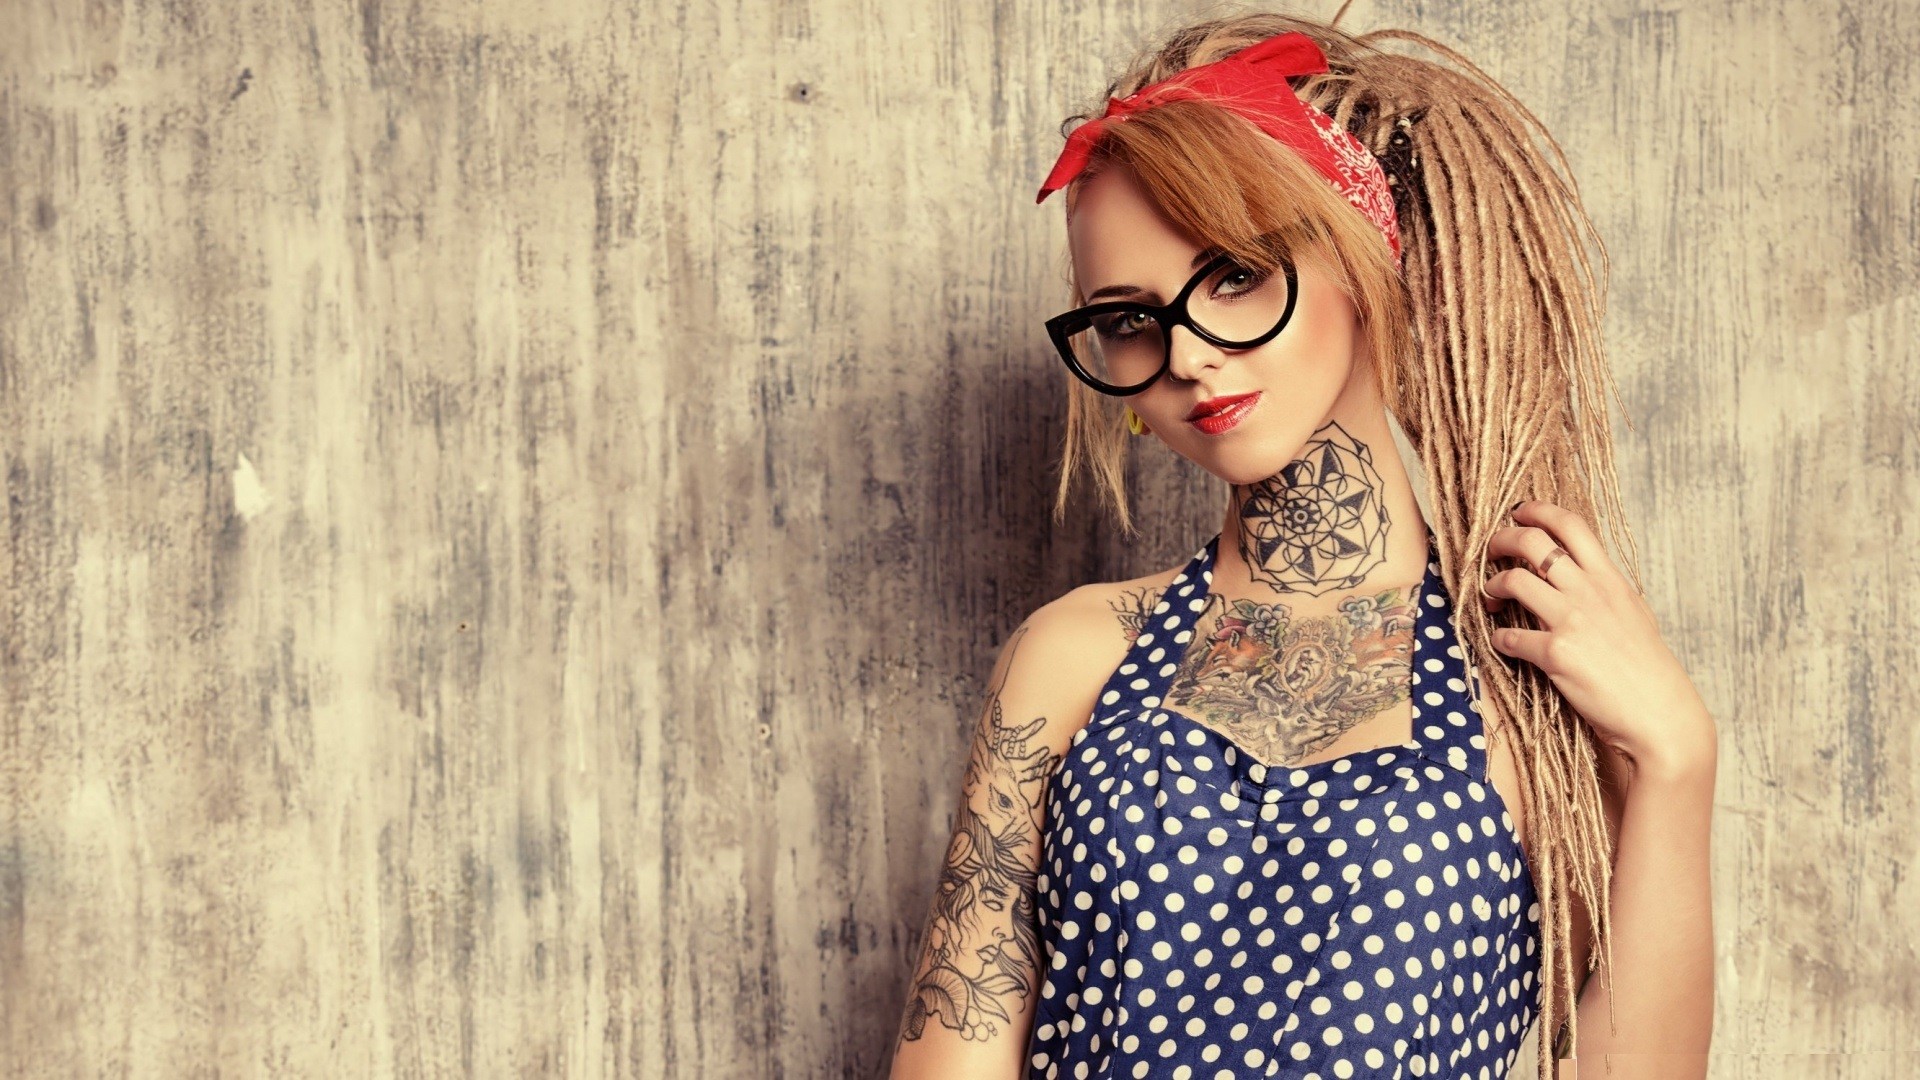 1920x1080 Girl Tattoos Wallpapers Pictures Photos Images – Girl Wallpaper USA